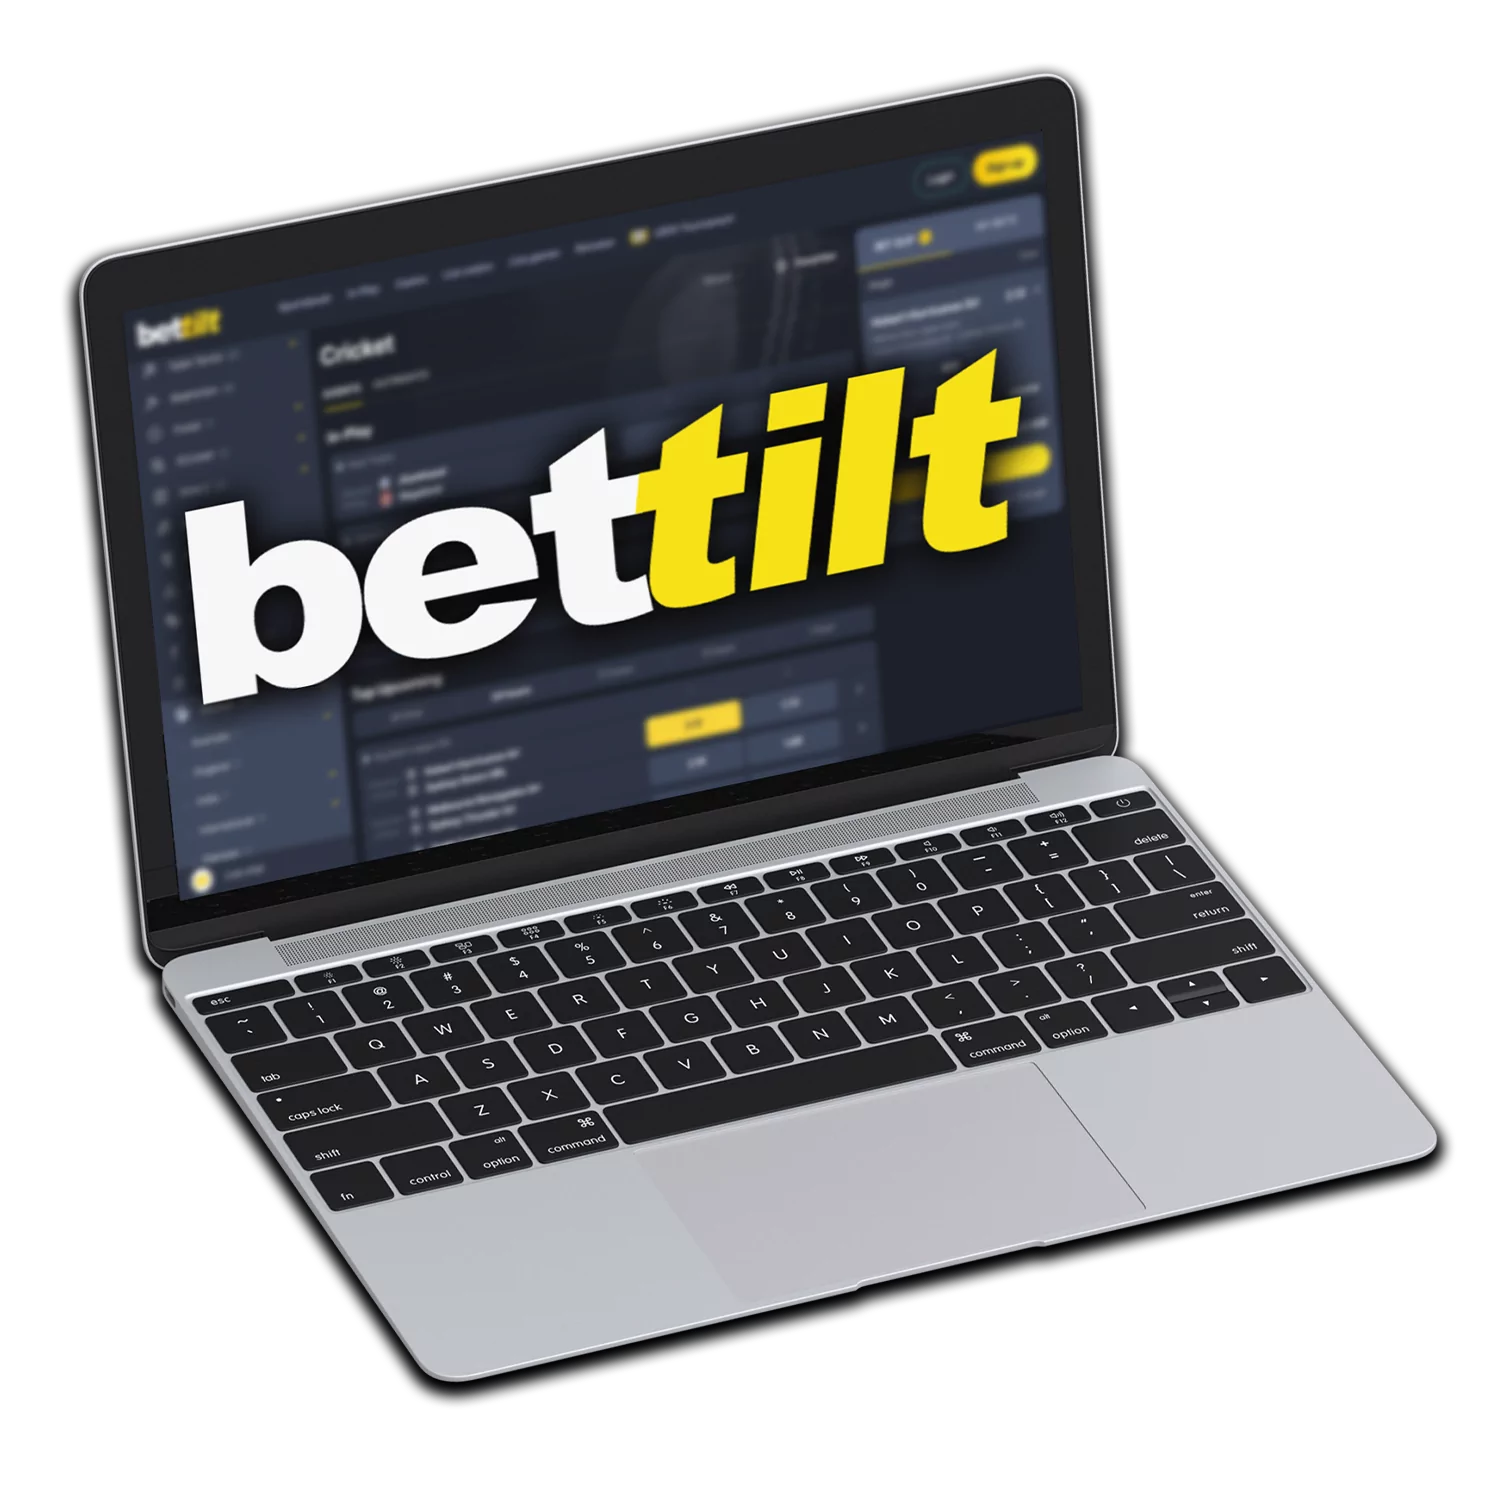 Start betting on cricket or other sports events at Bettilt India.